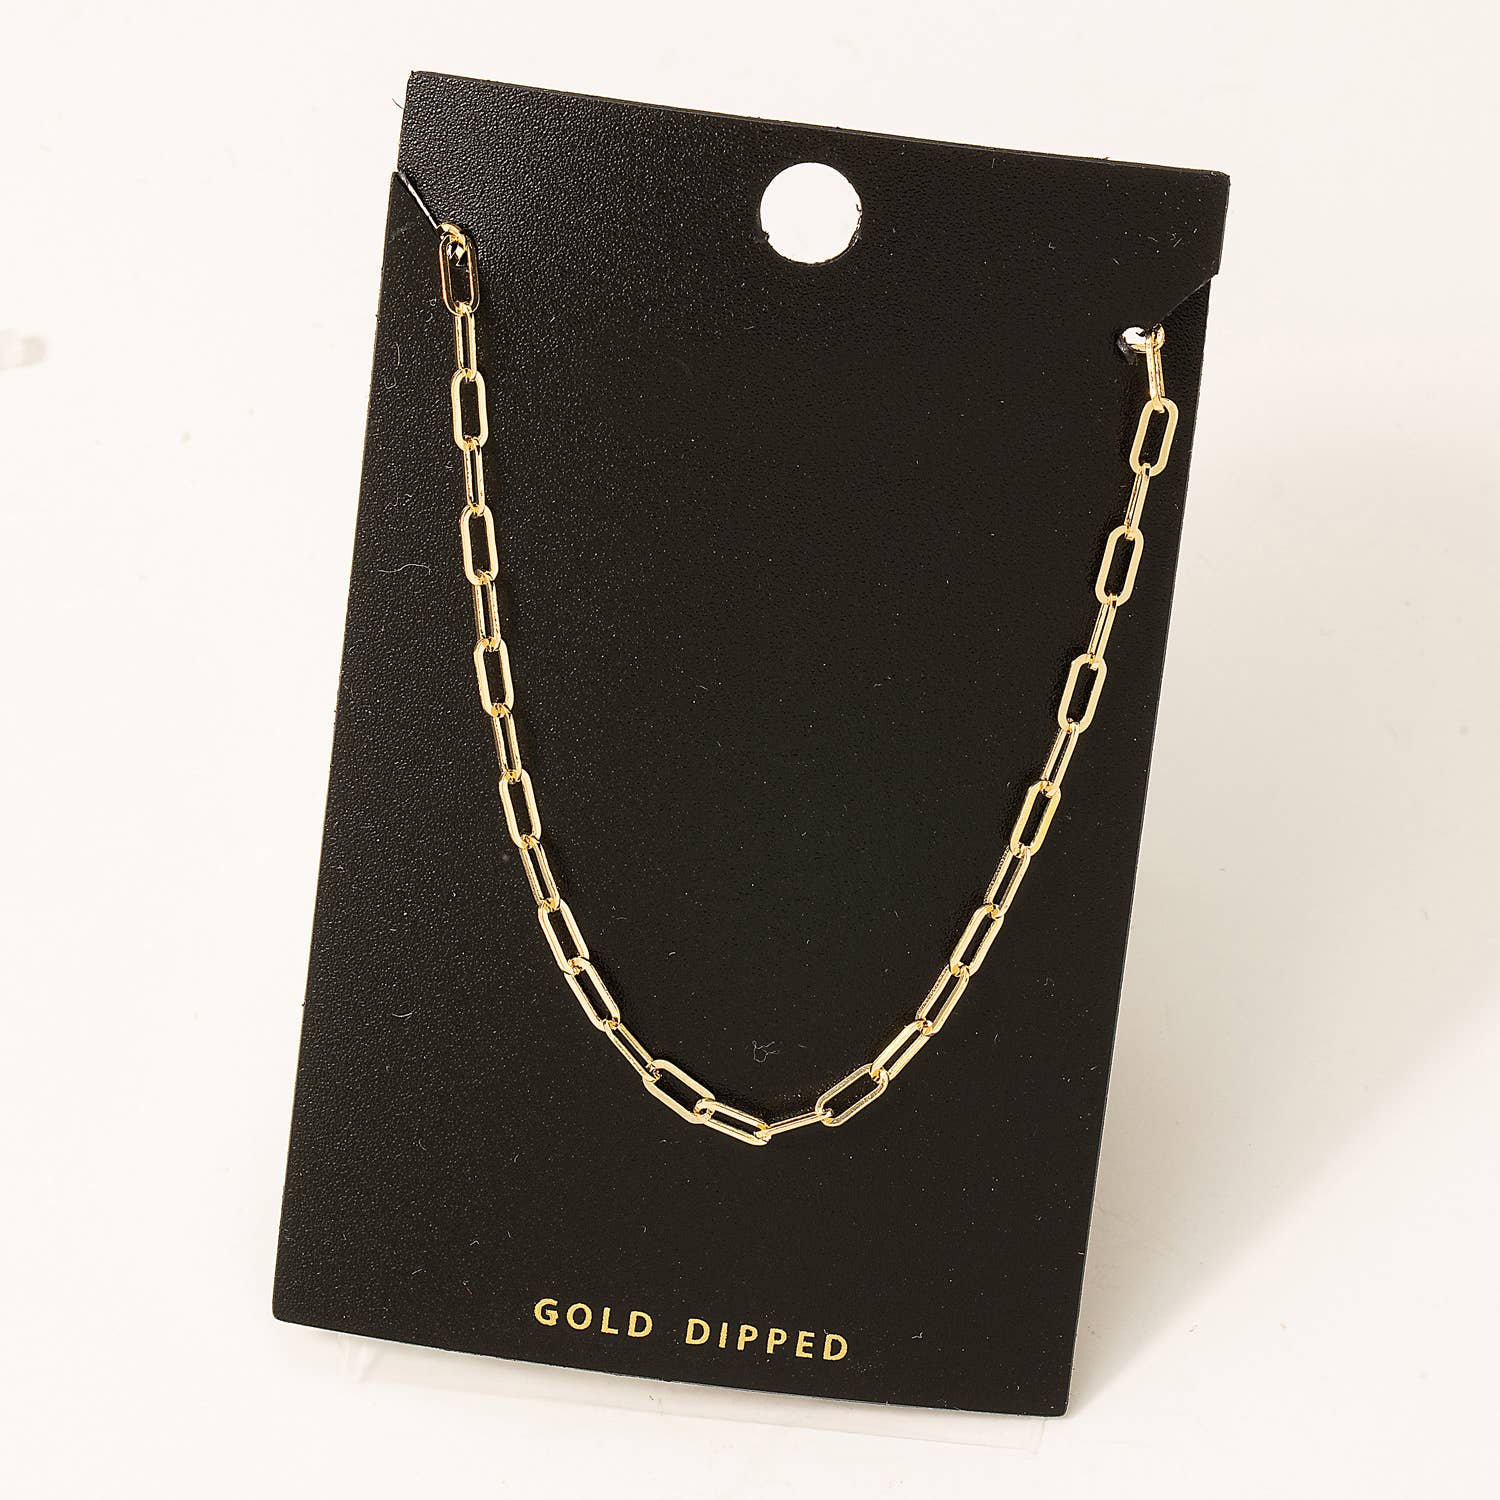 Enhance your style with our Gold Dipped Chain Link Necklace. Expertly crafted, this necklace features a stunning gold dipped chain link design, providing a luxurious touch to any outfit. Measuring 13 inches in length, it is the perfect addition to your jewelry collection. Elevate your look today.